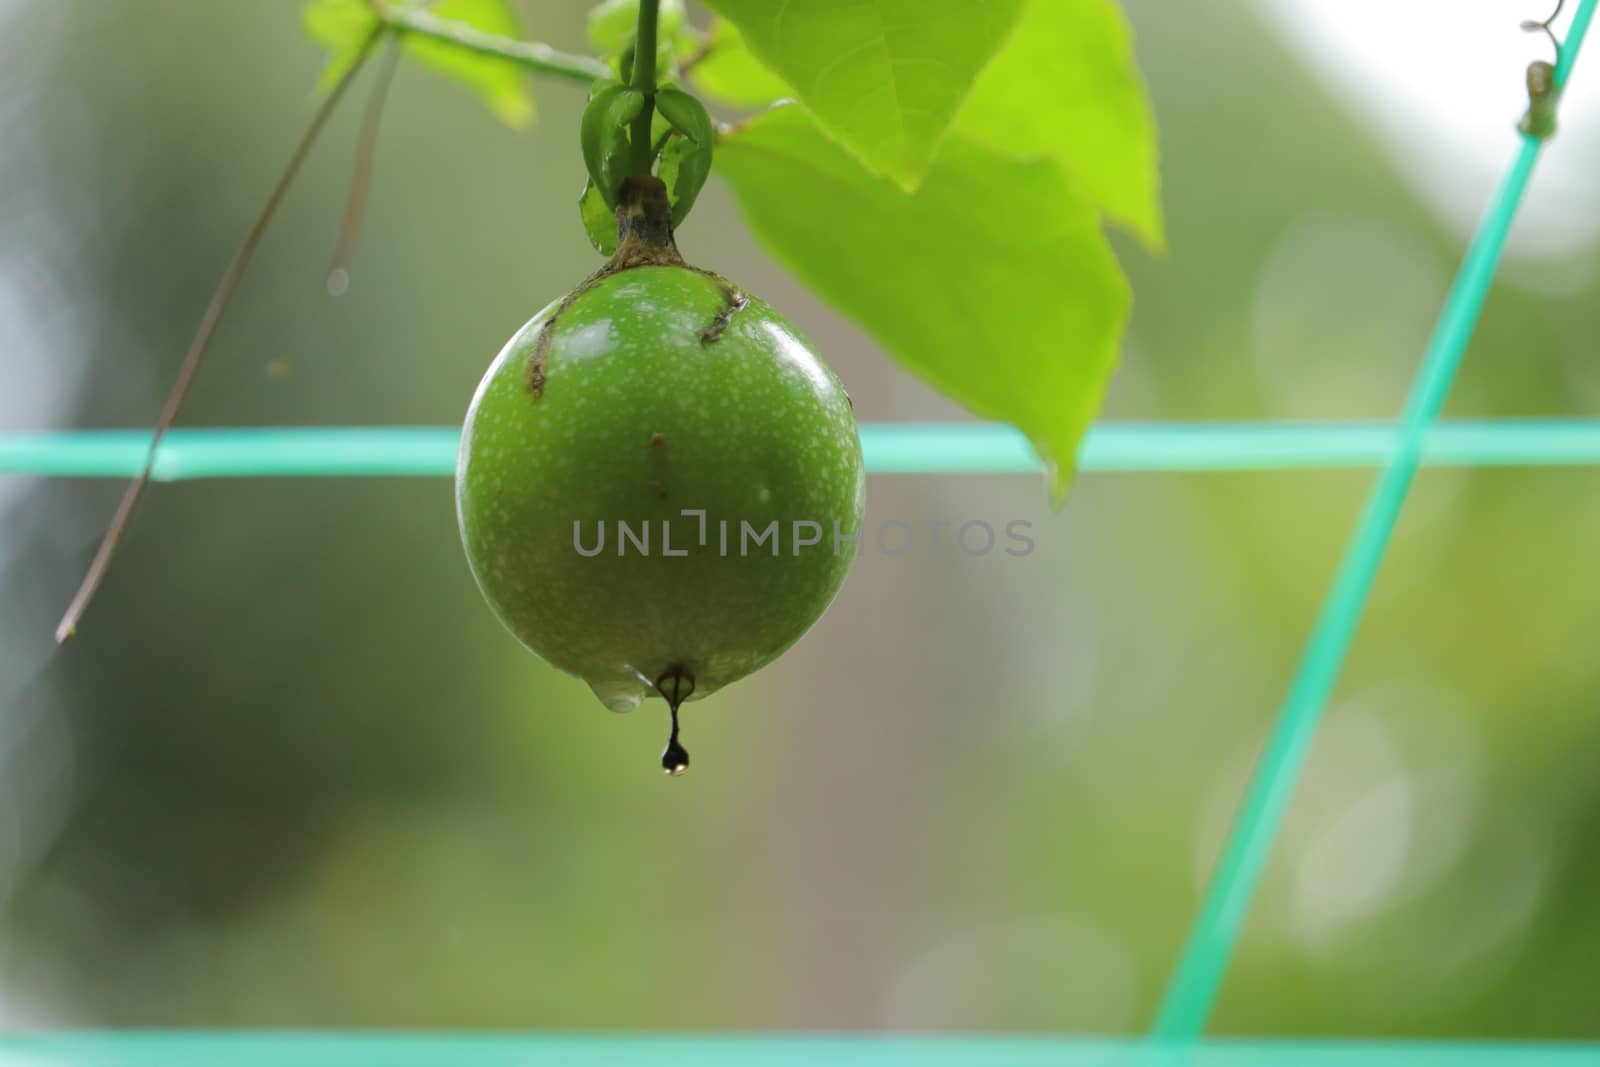 Green fruit hanging from the stem between green leaves and sky